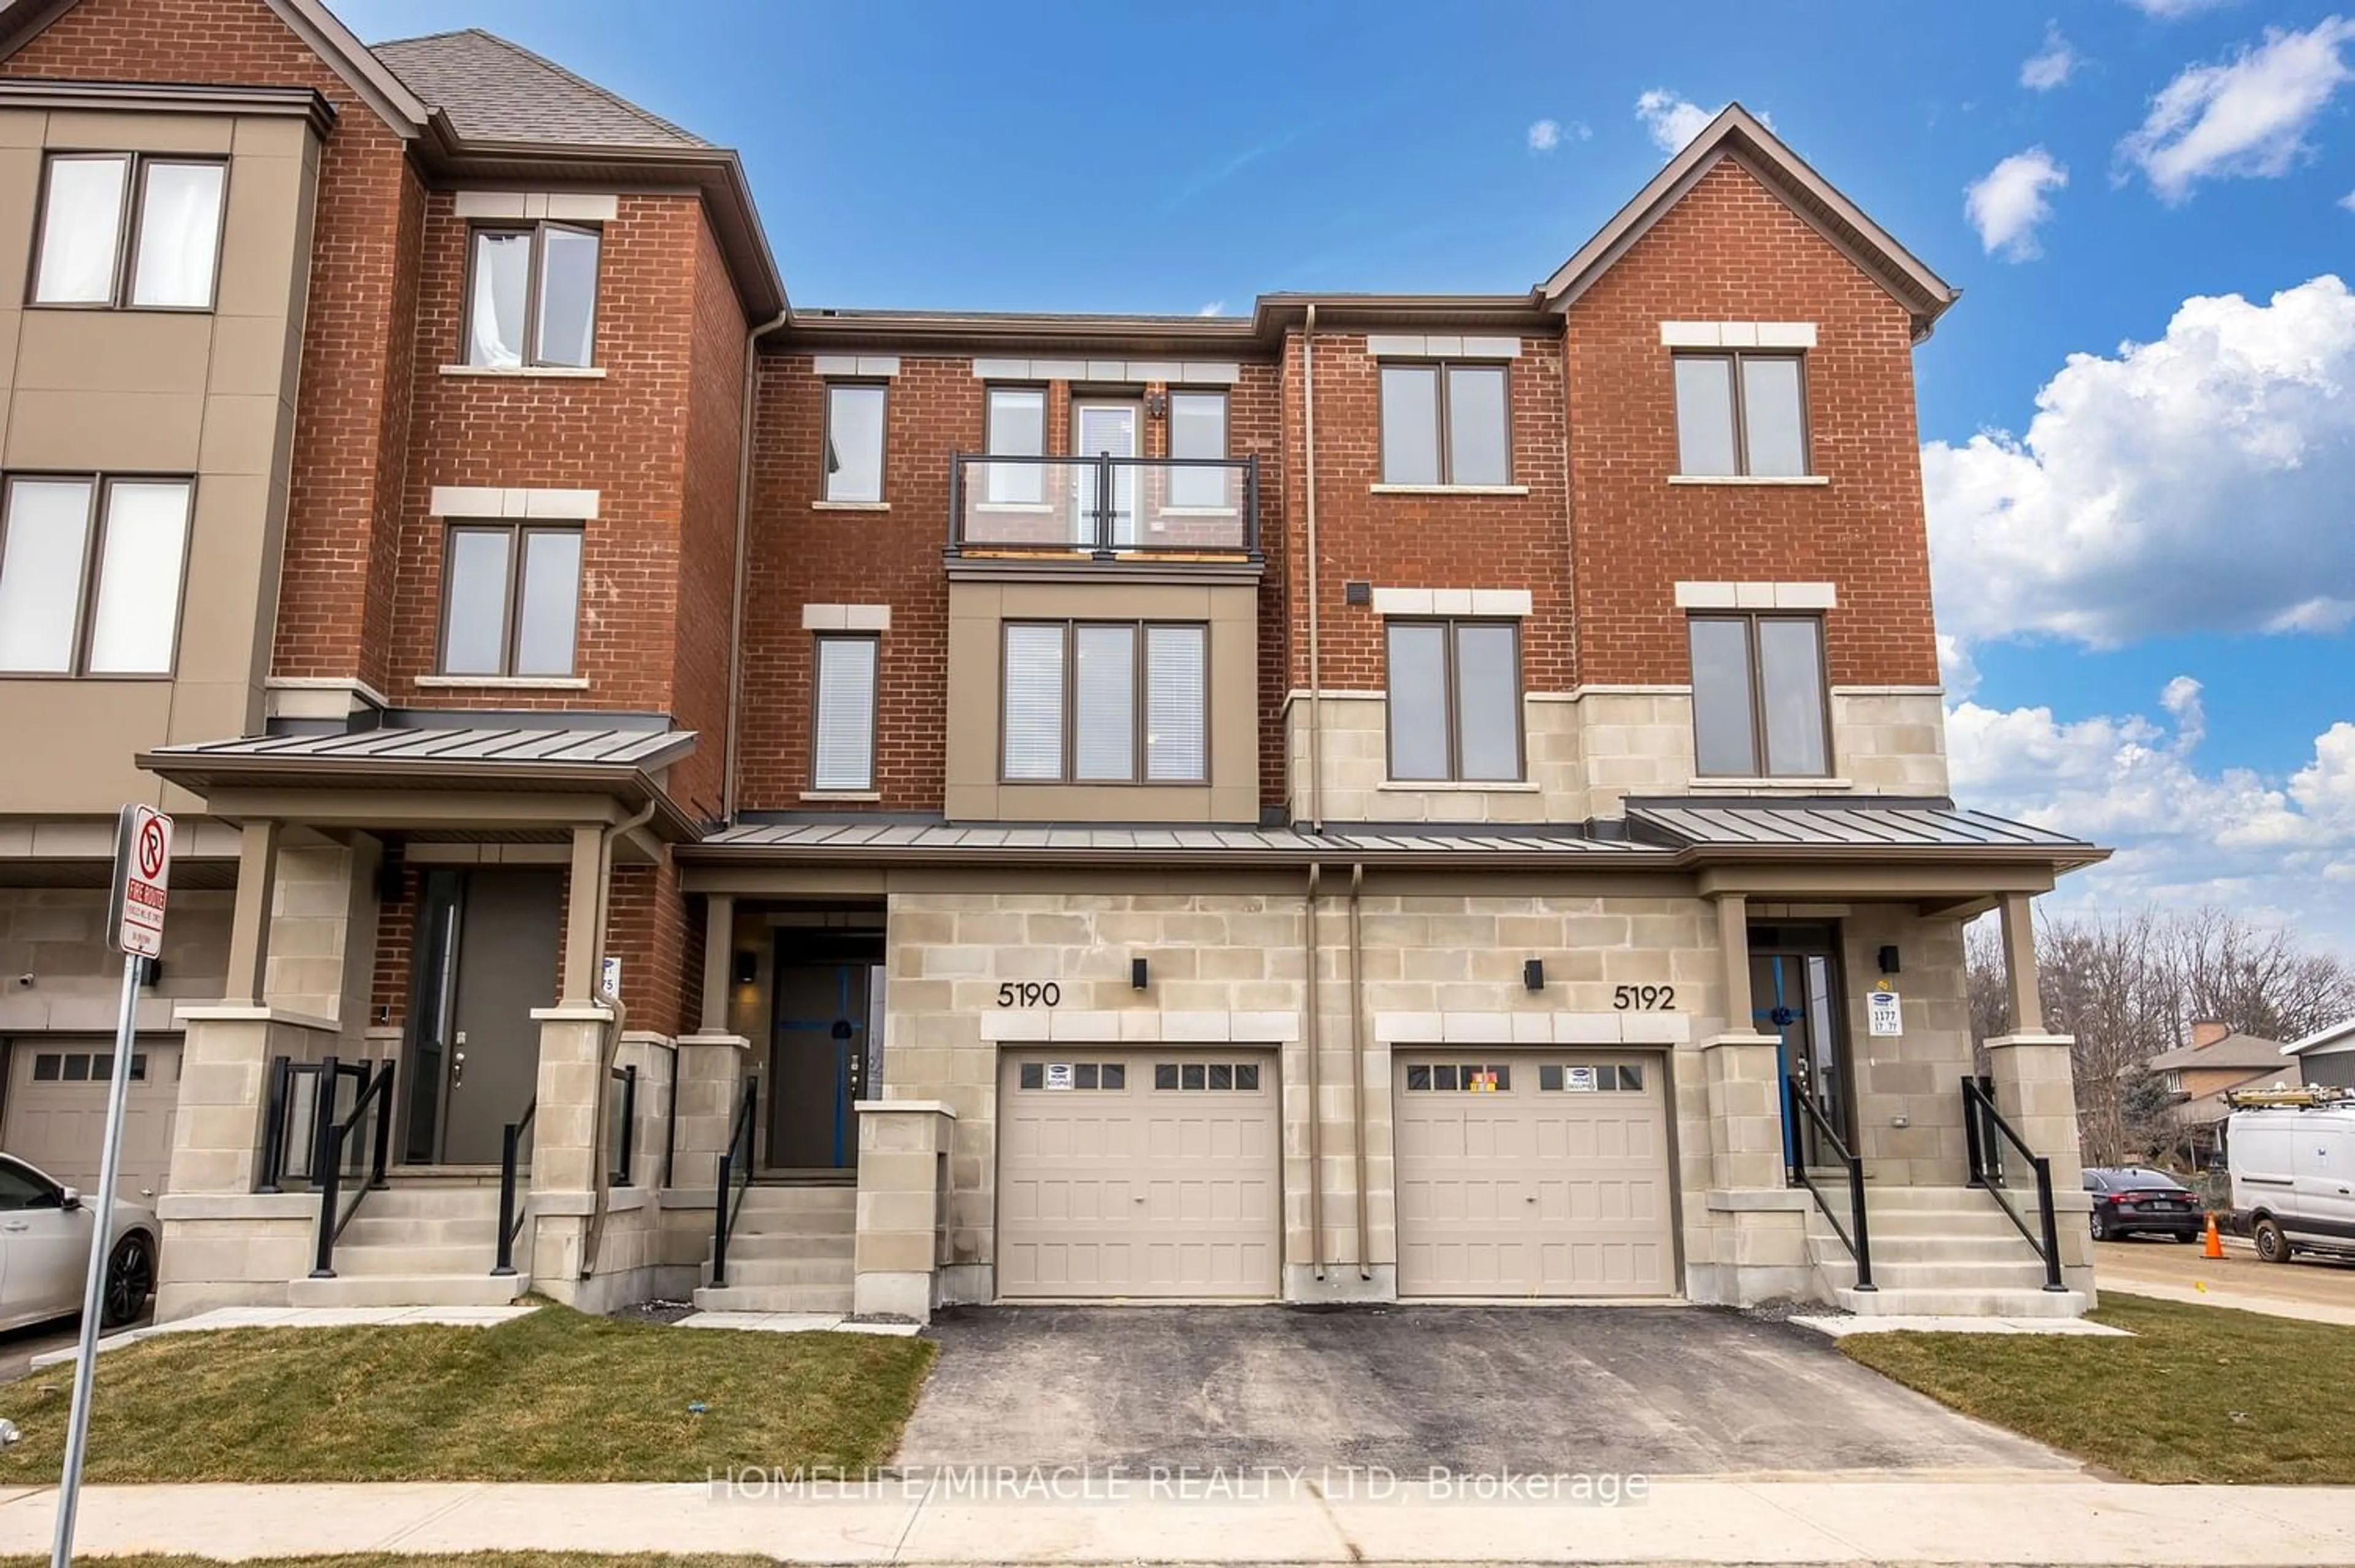 A pic from exterior of the house or condo for 5190 Viola Desmond Dr, Mississauga Ontario L5M 2S7